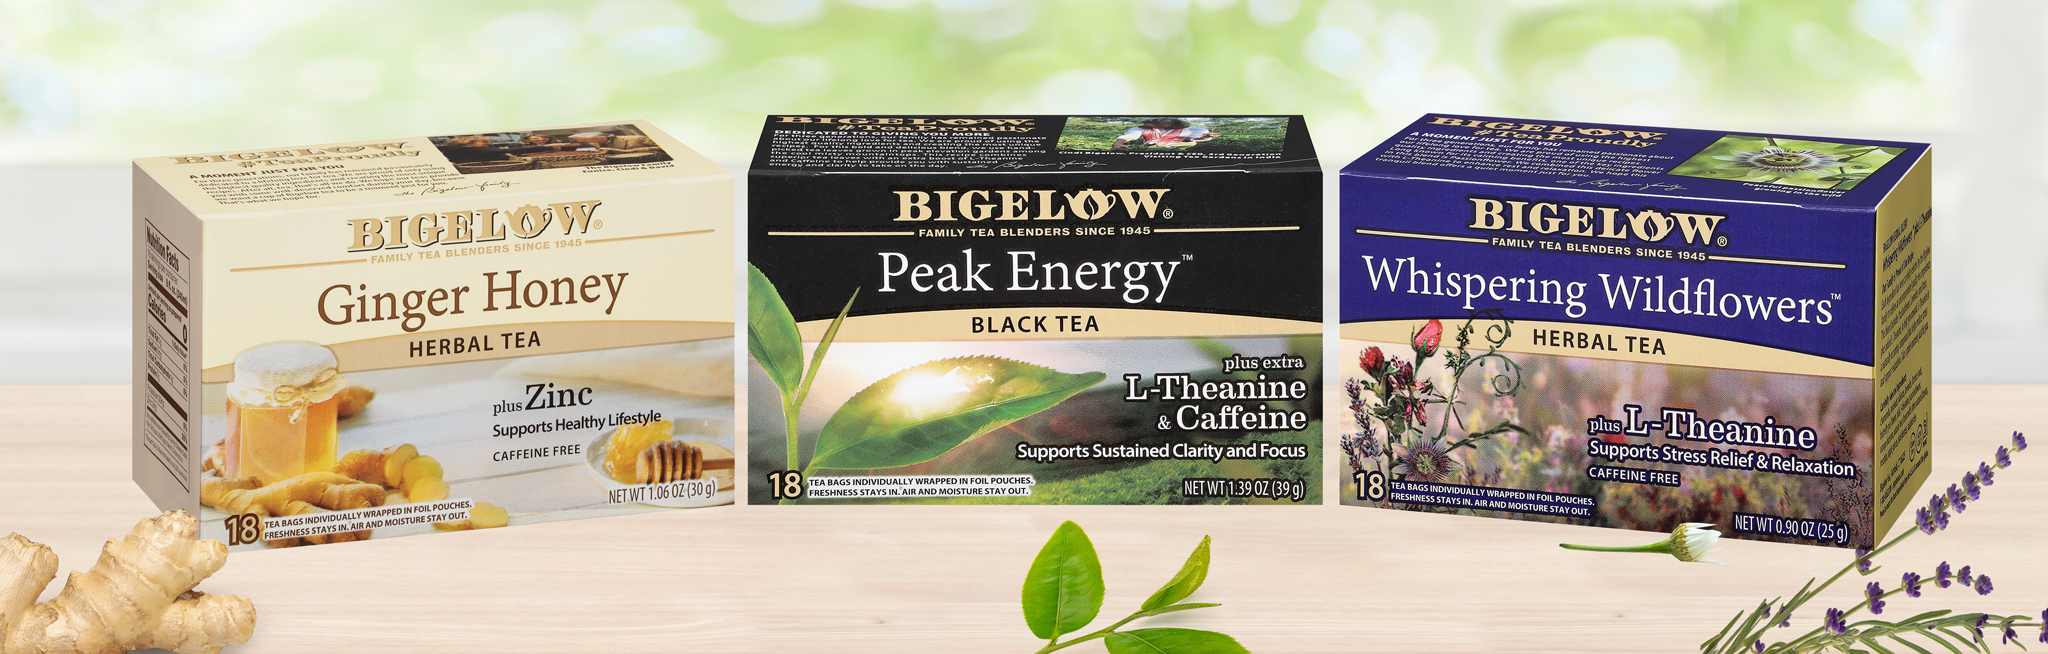 Bigelow Tea Announces NEW Black and Herbal Teas Featuring Ingredients & Nutrients with Functional Benefits